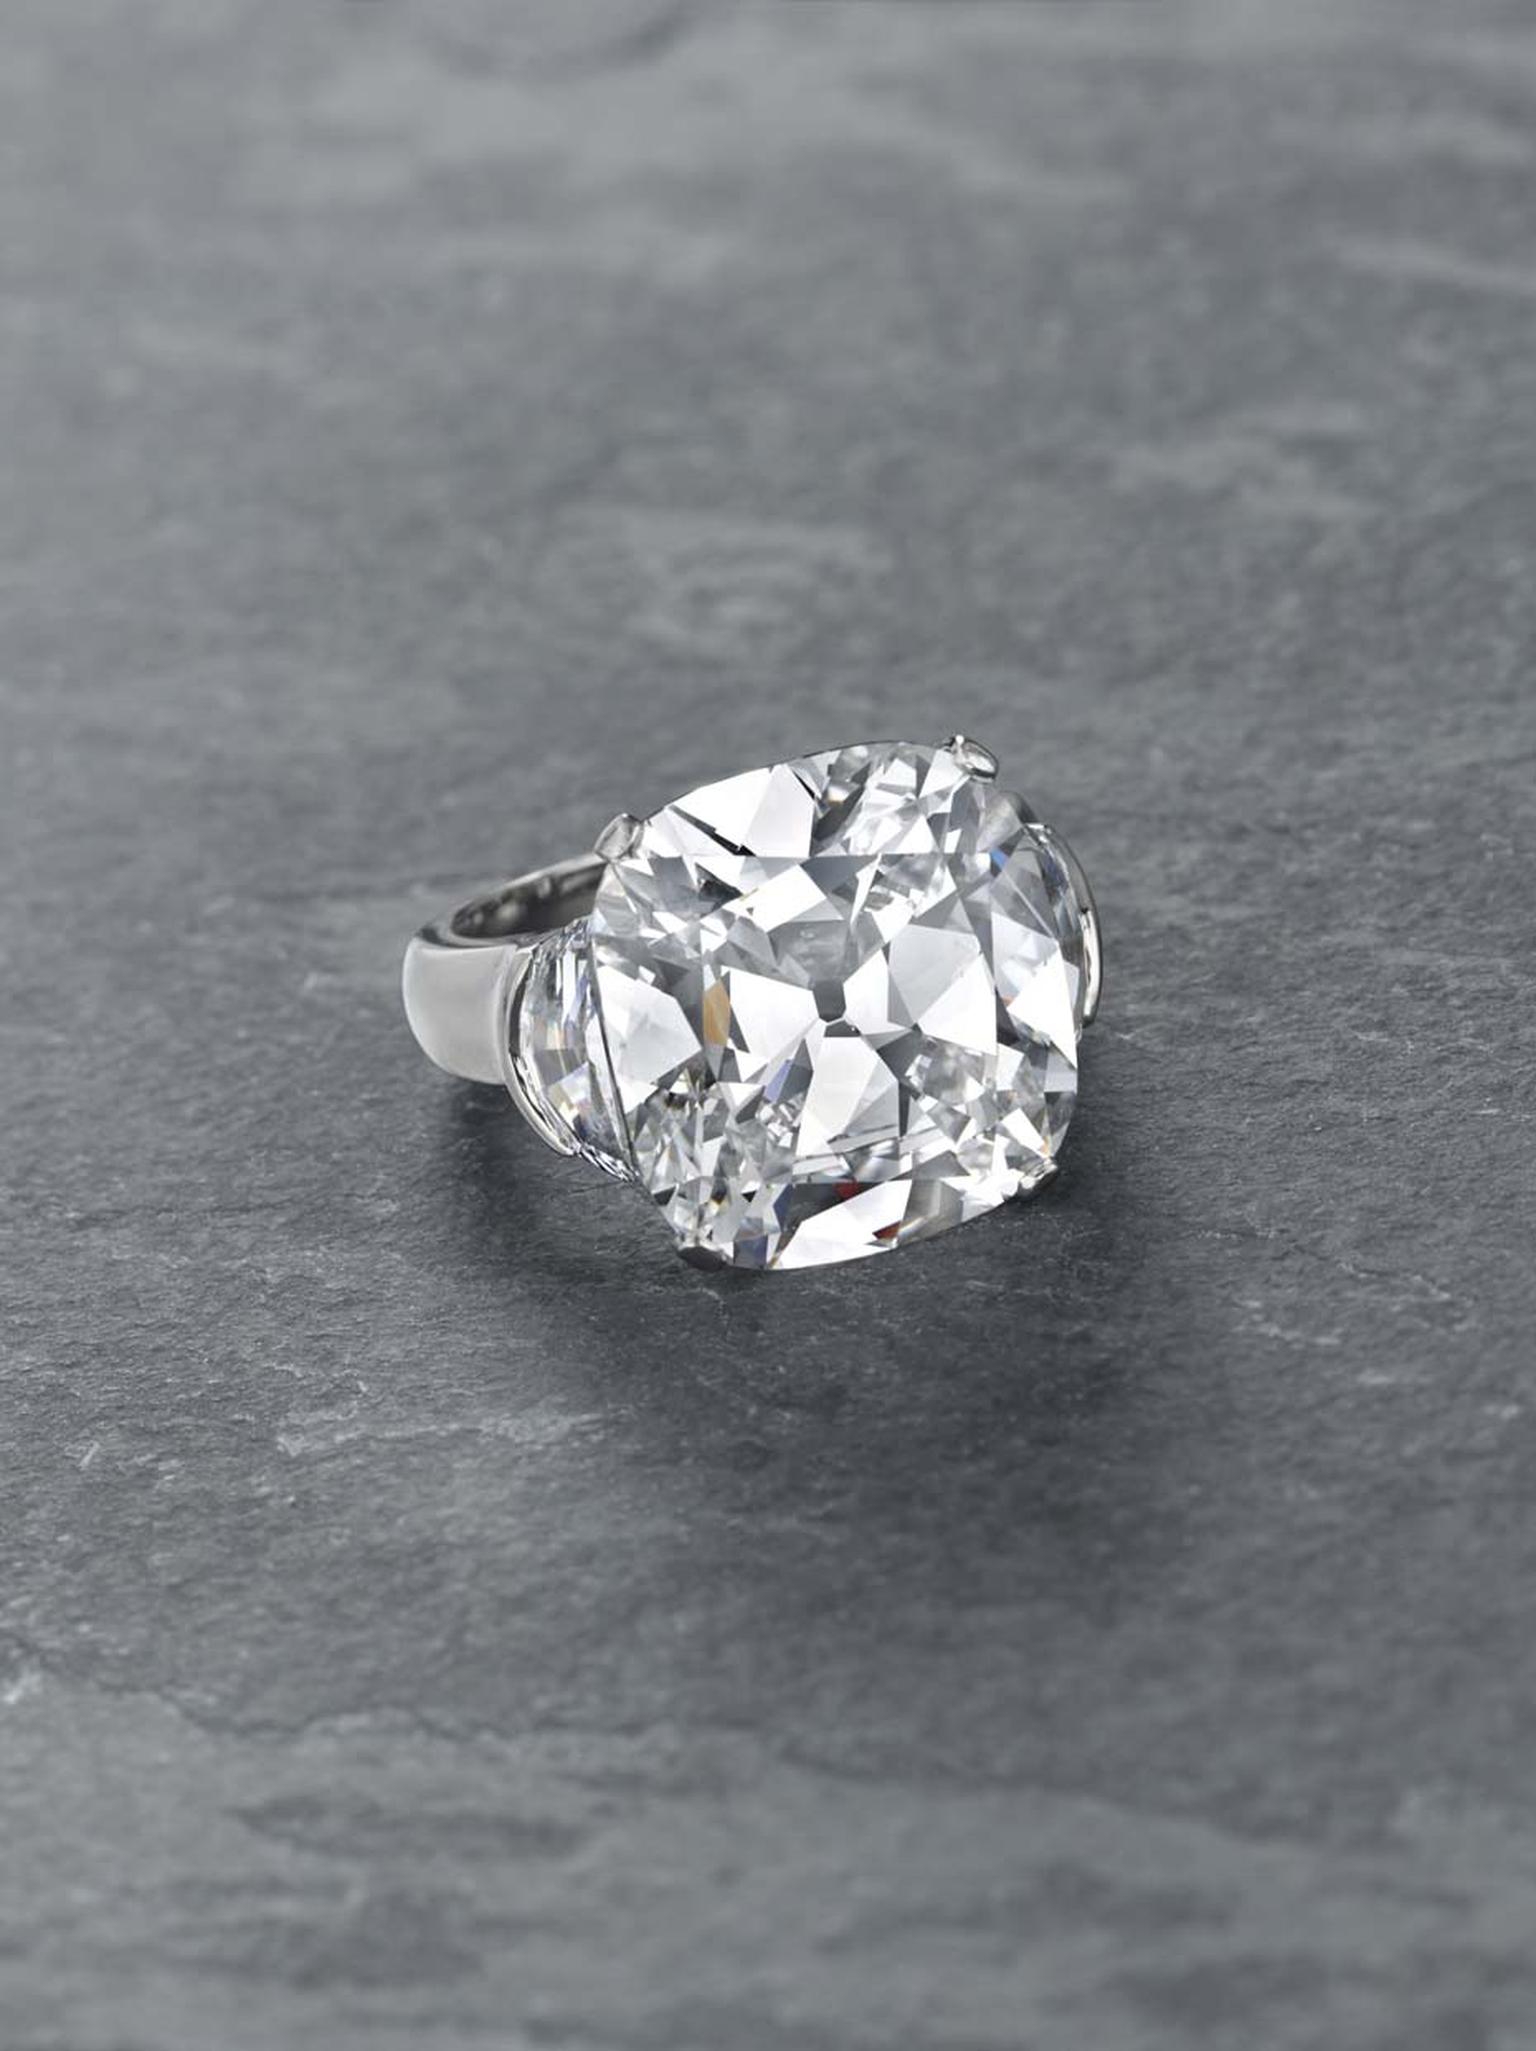 A number of Graff jewels make up the 300 lots at Christie's Magnificent Jewels auction in New York, including this cushion-cut D color, potentially flawless diamond of 11.03 carats, with an estimated value of up to $1 million.